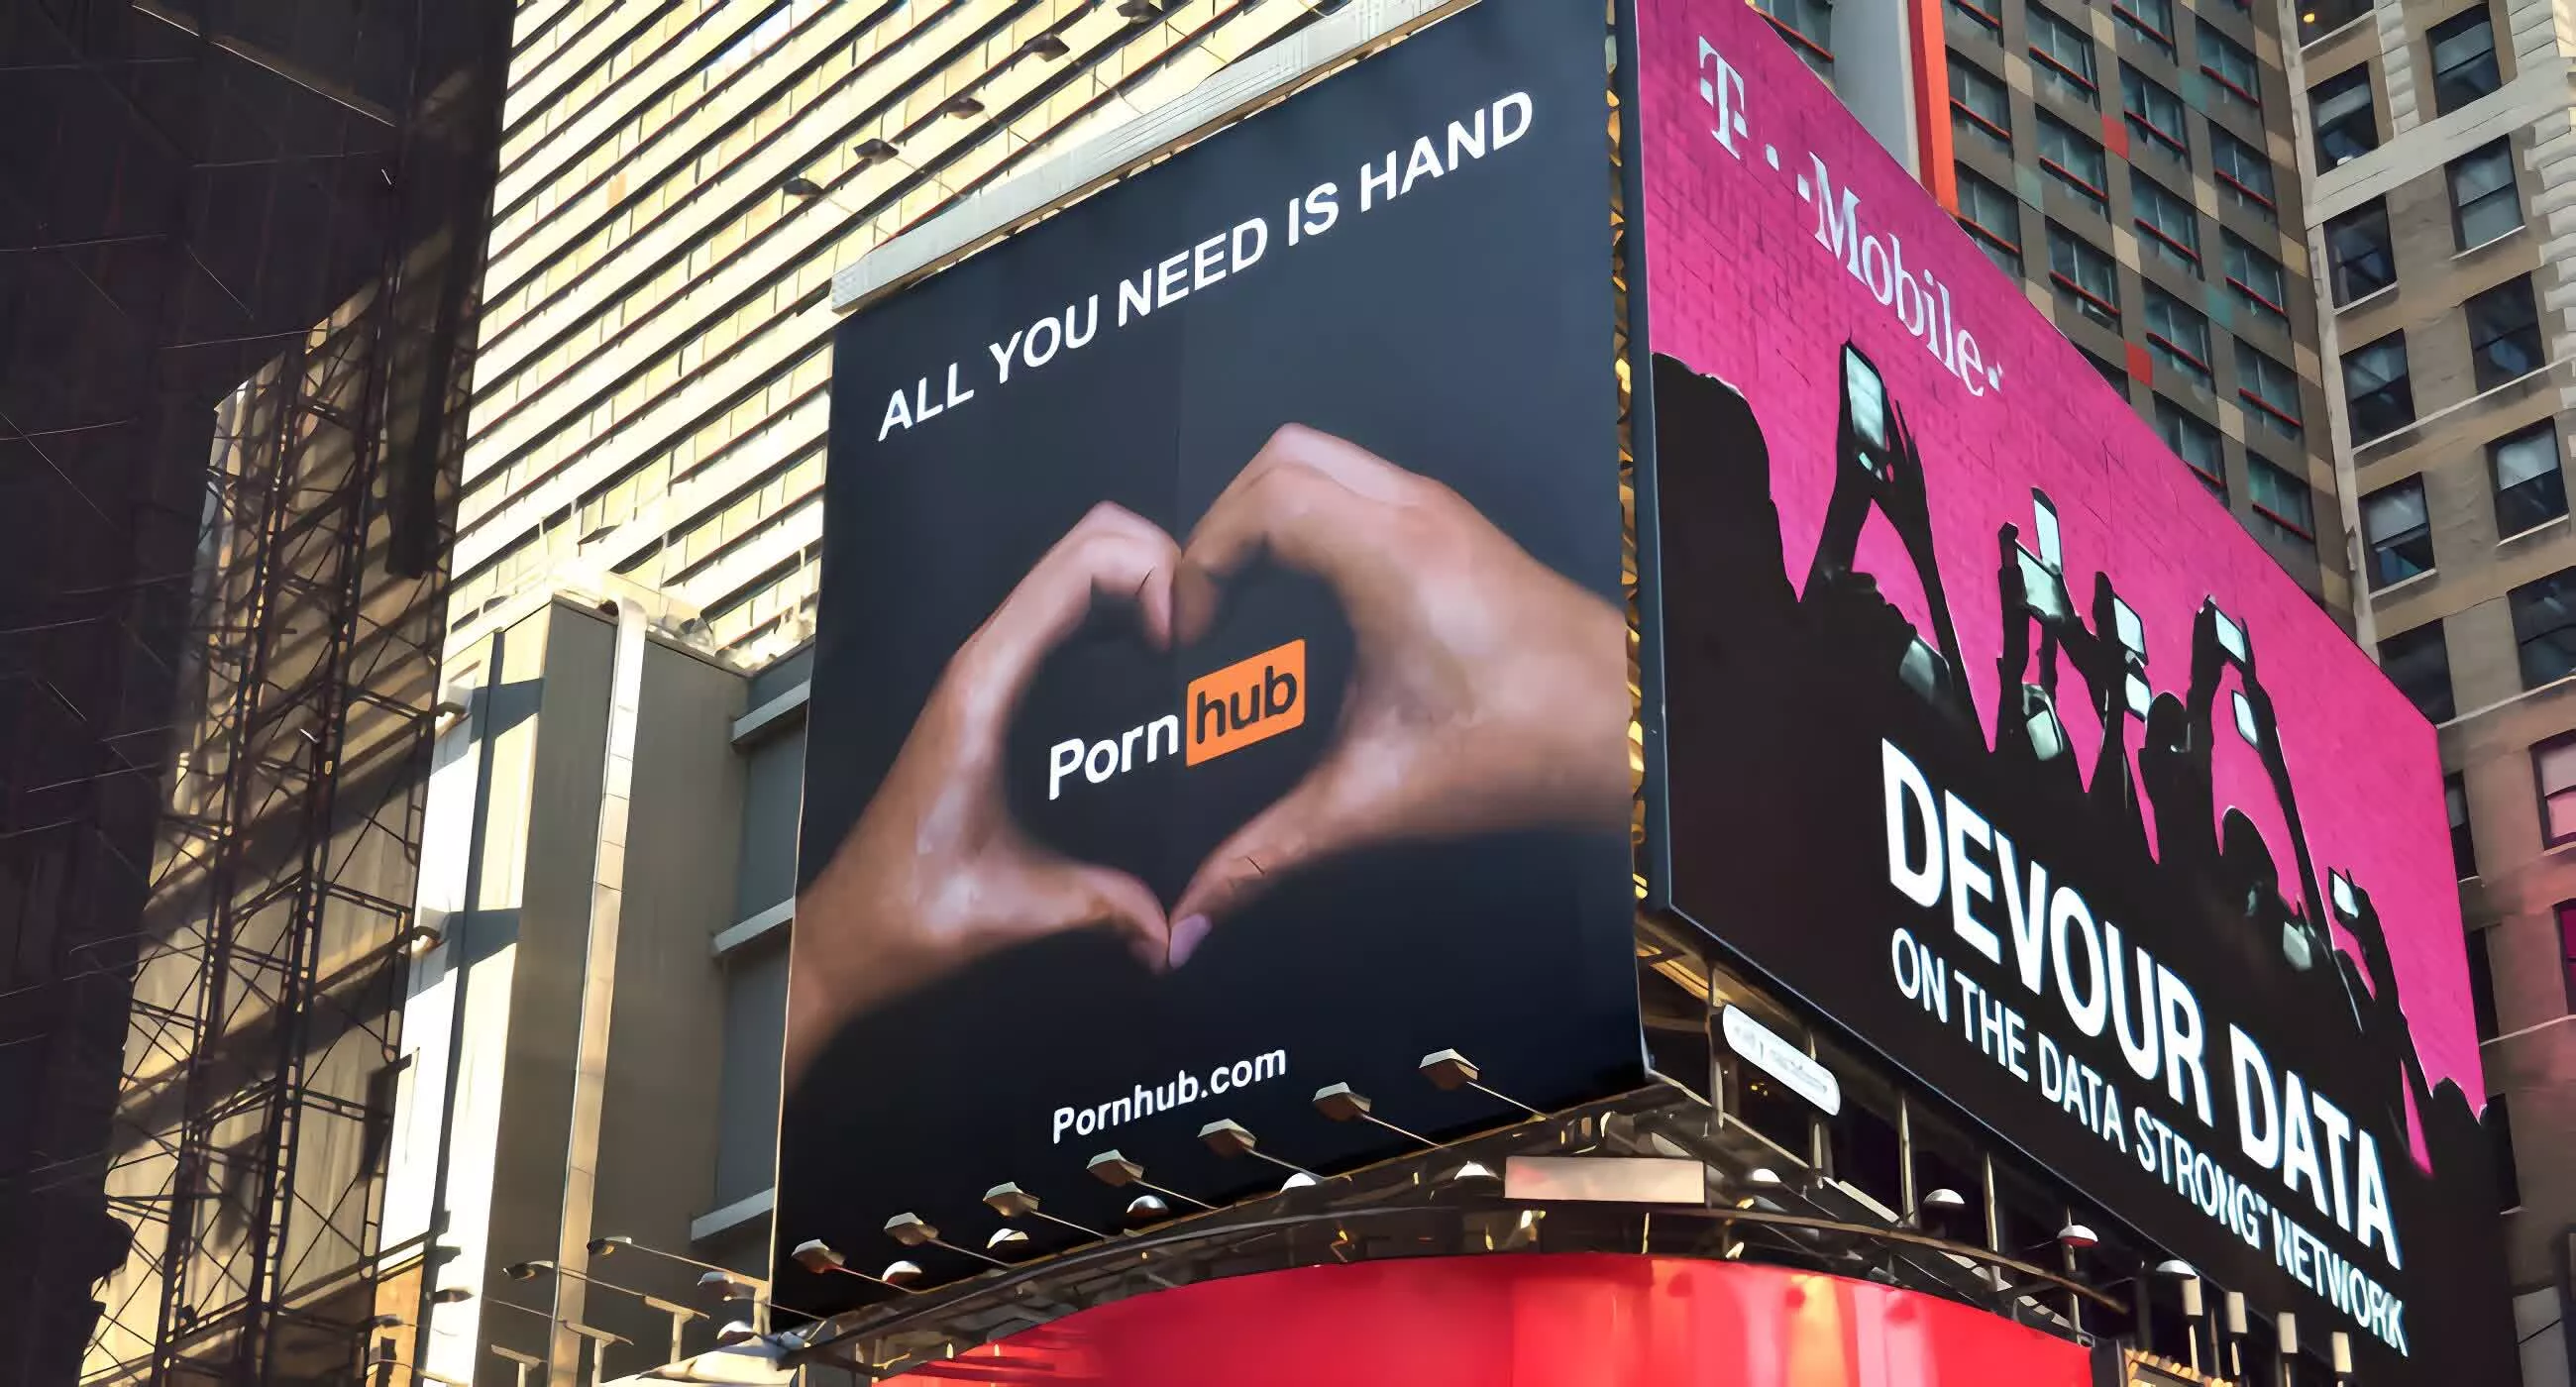 Pornhub protests Utah age verification law by blocking the state's access